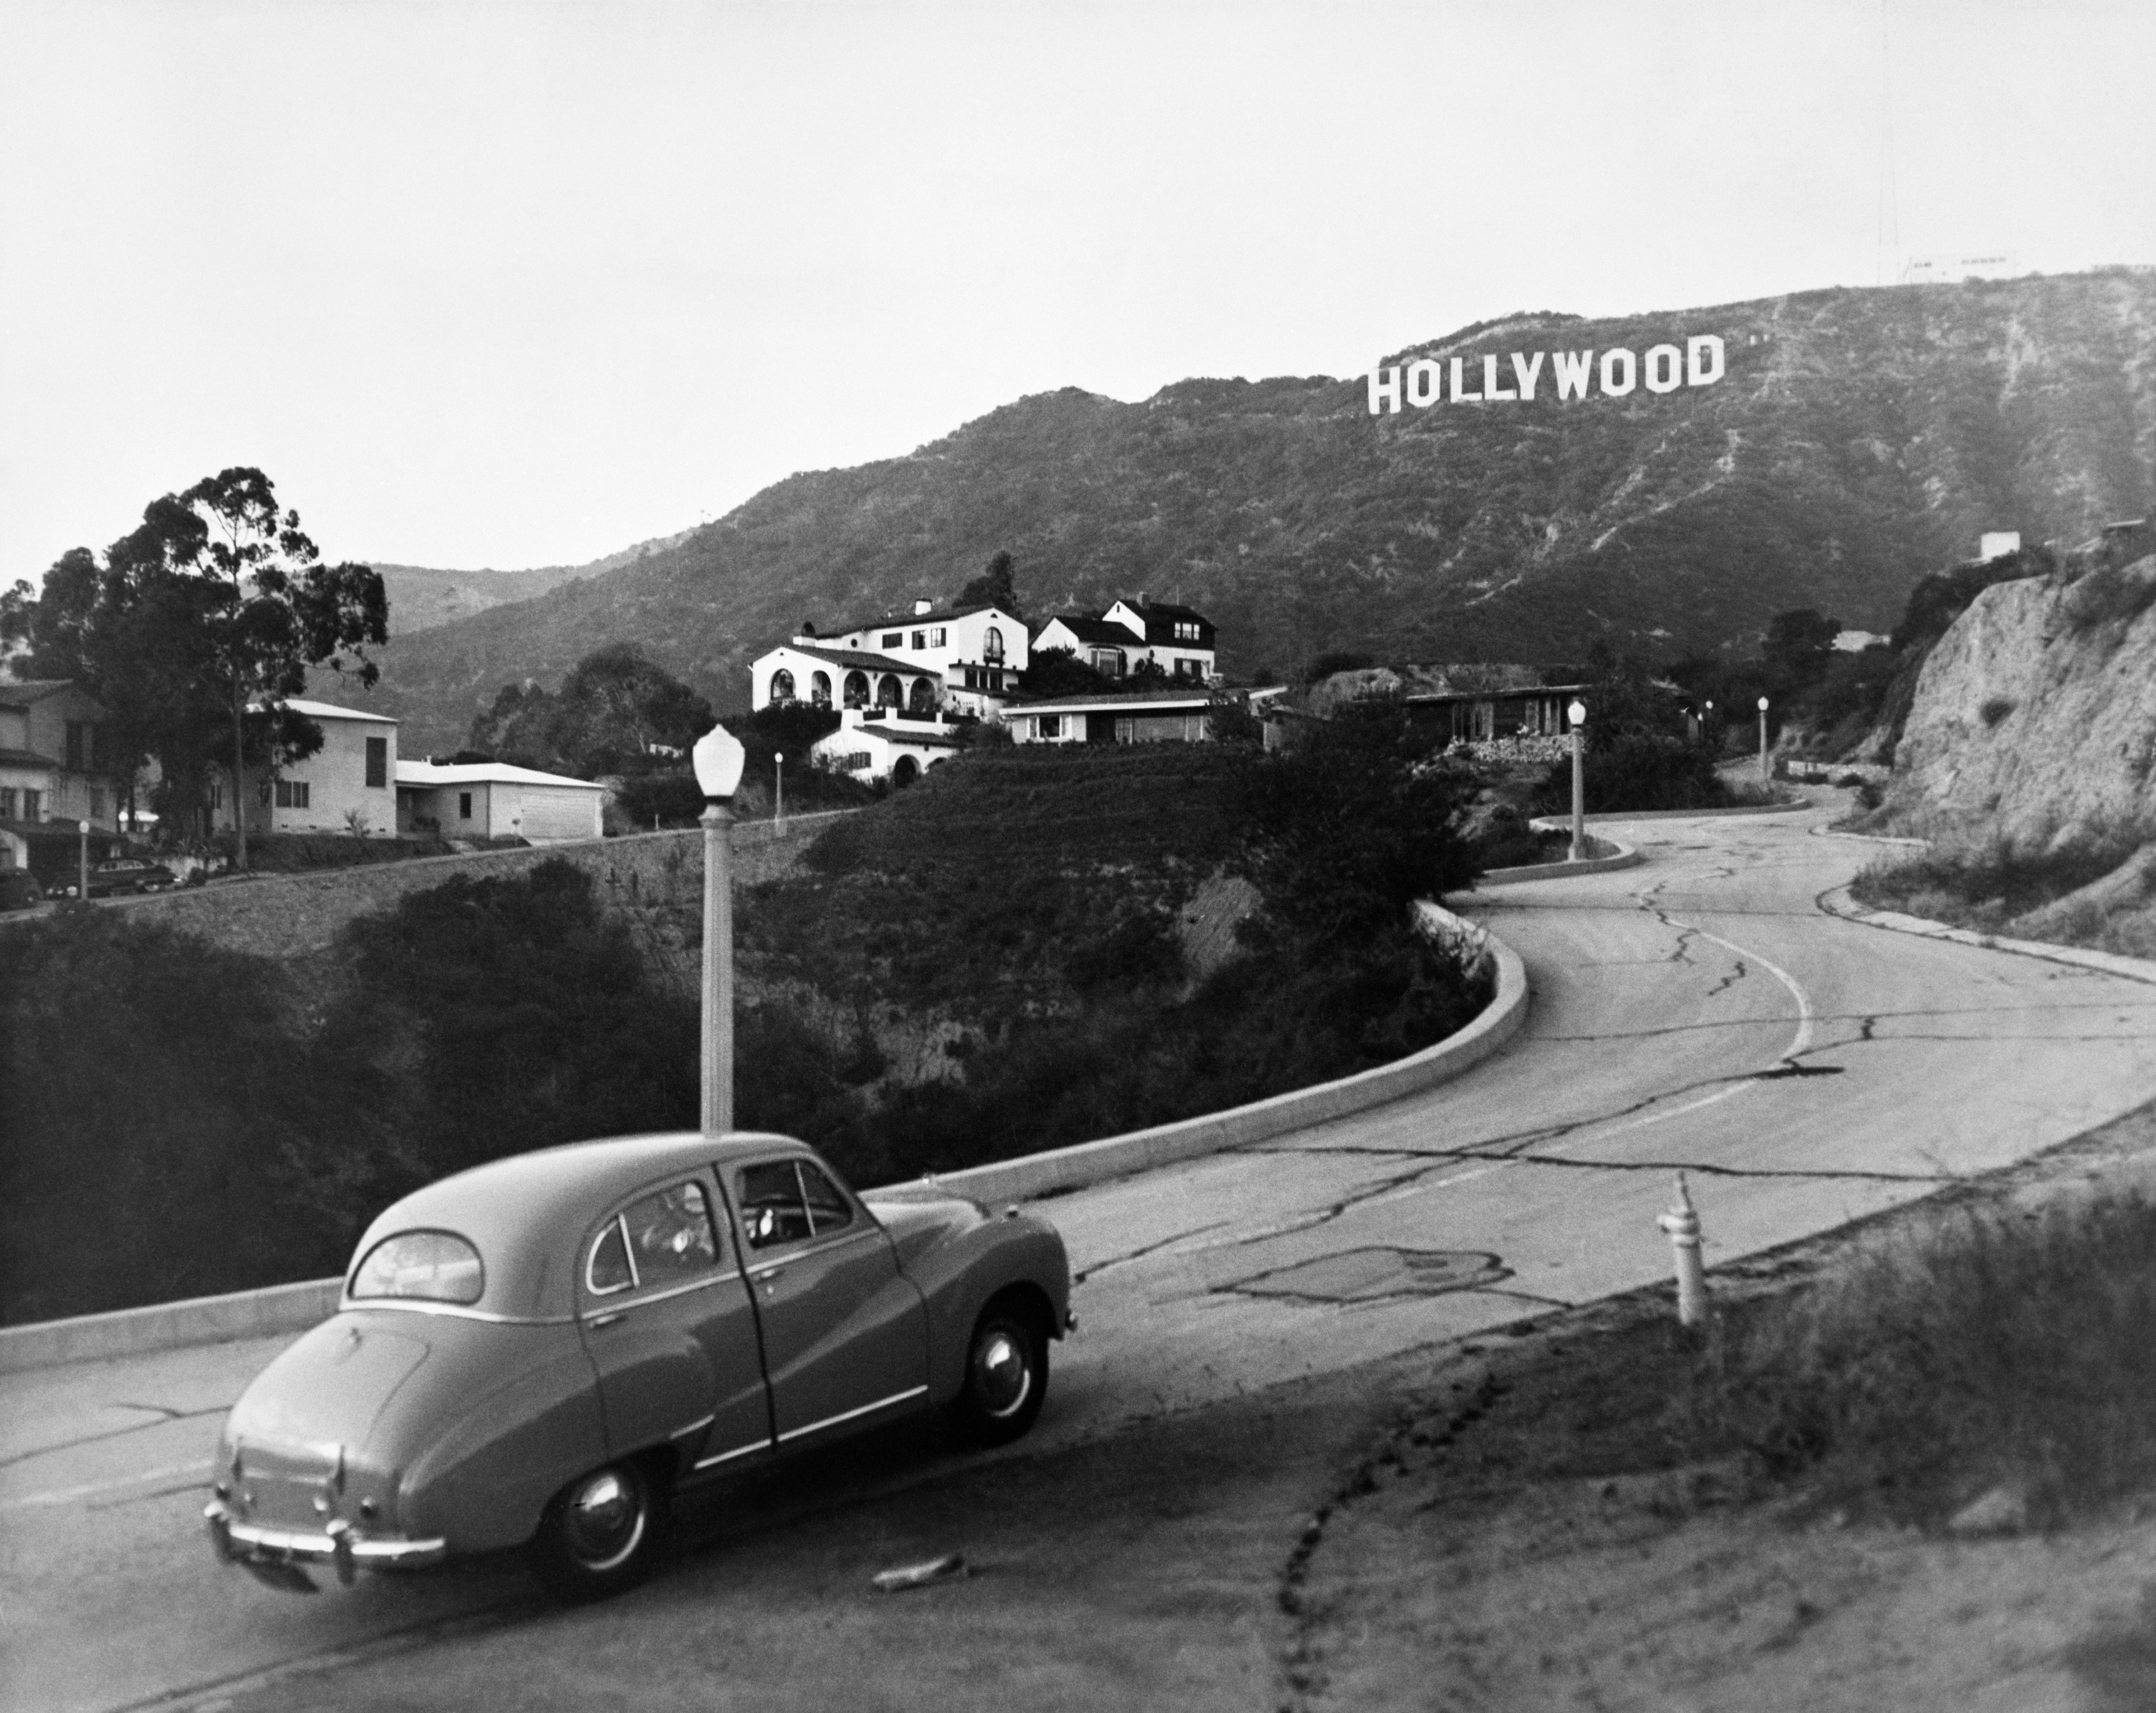 How To Go To Hollywood Sign By Car